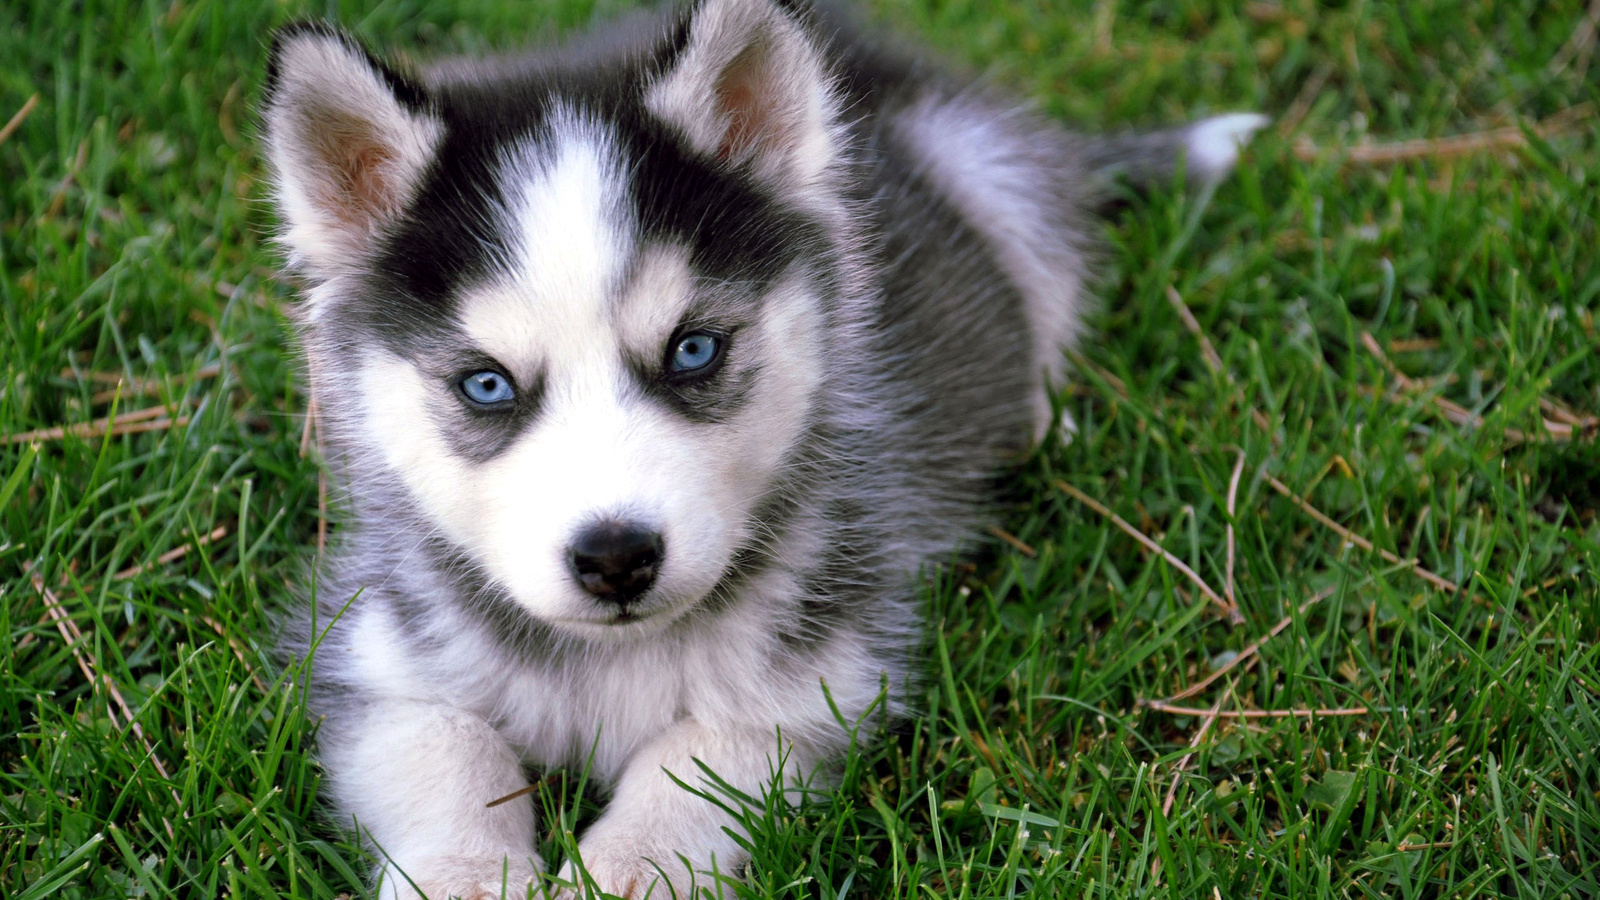 Baby Husky Wallpaper Images amp Pictures   Becuo